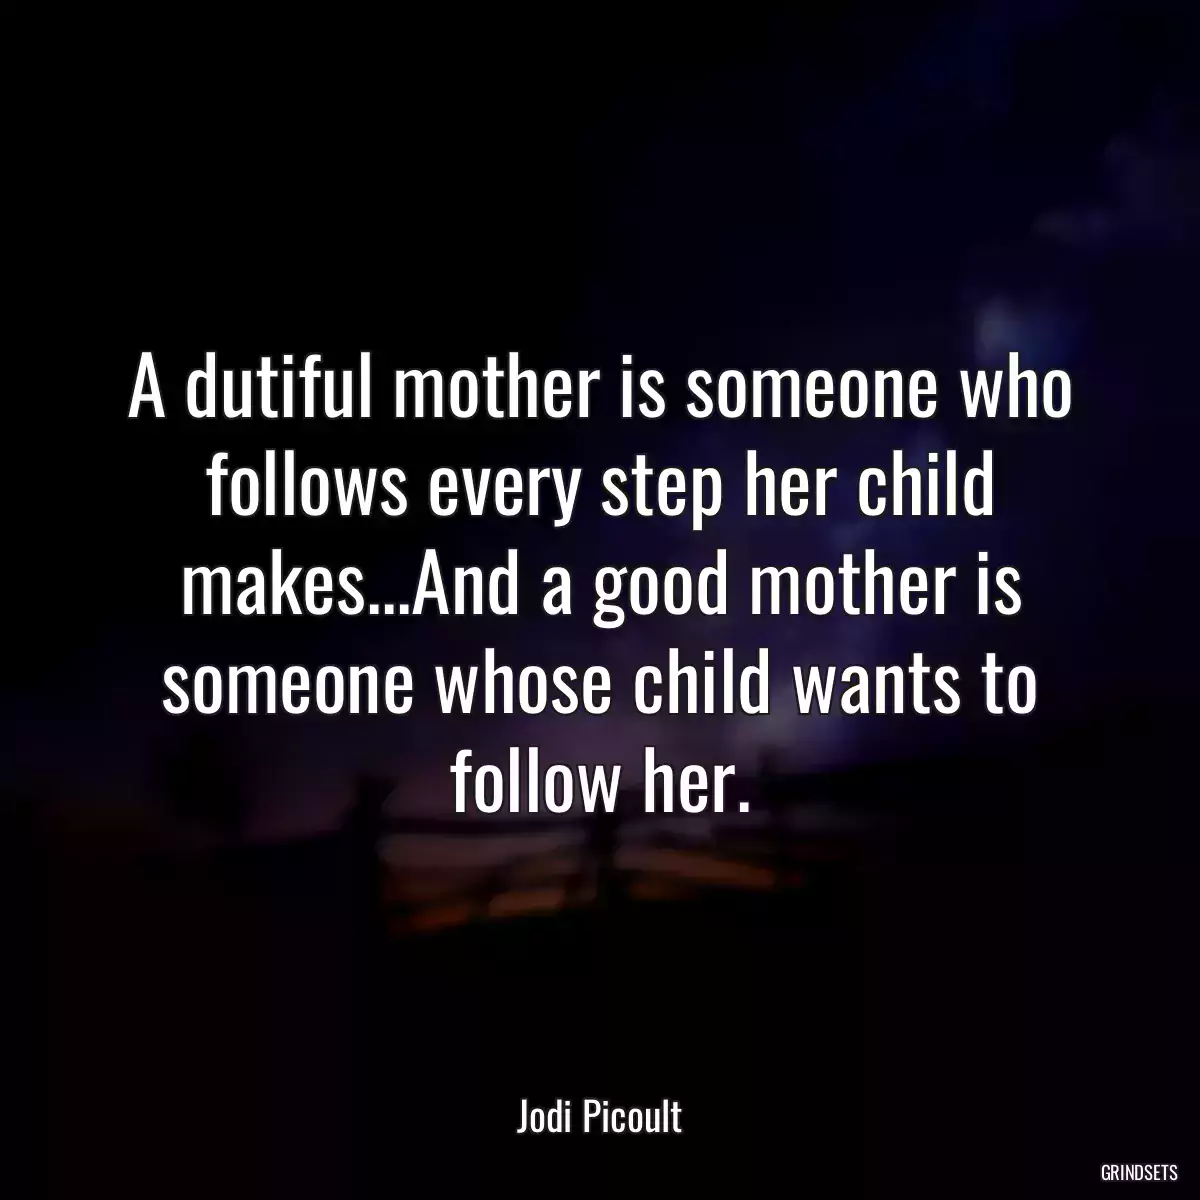 A dutiful mother is someone who follows every step her child makes...And a good mother is someone whose child wants to follow her.